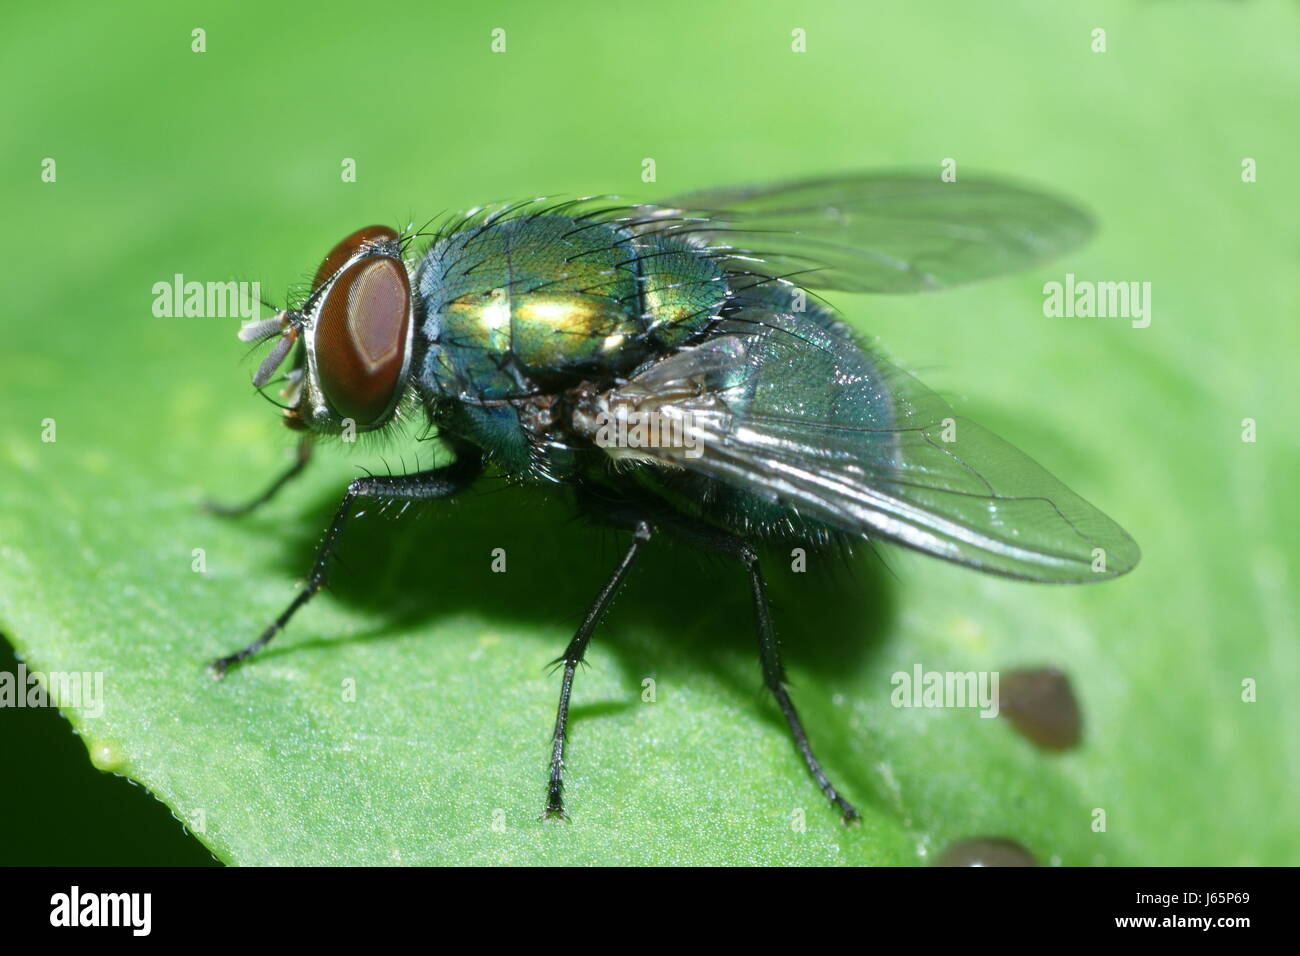 fly flies flys flying green eyes wing antenna iridescent frequent bristly Stock Photo